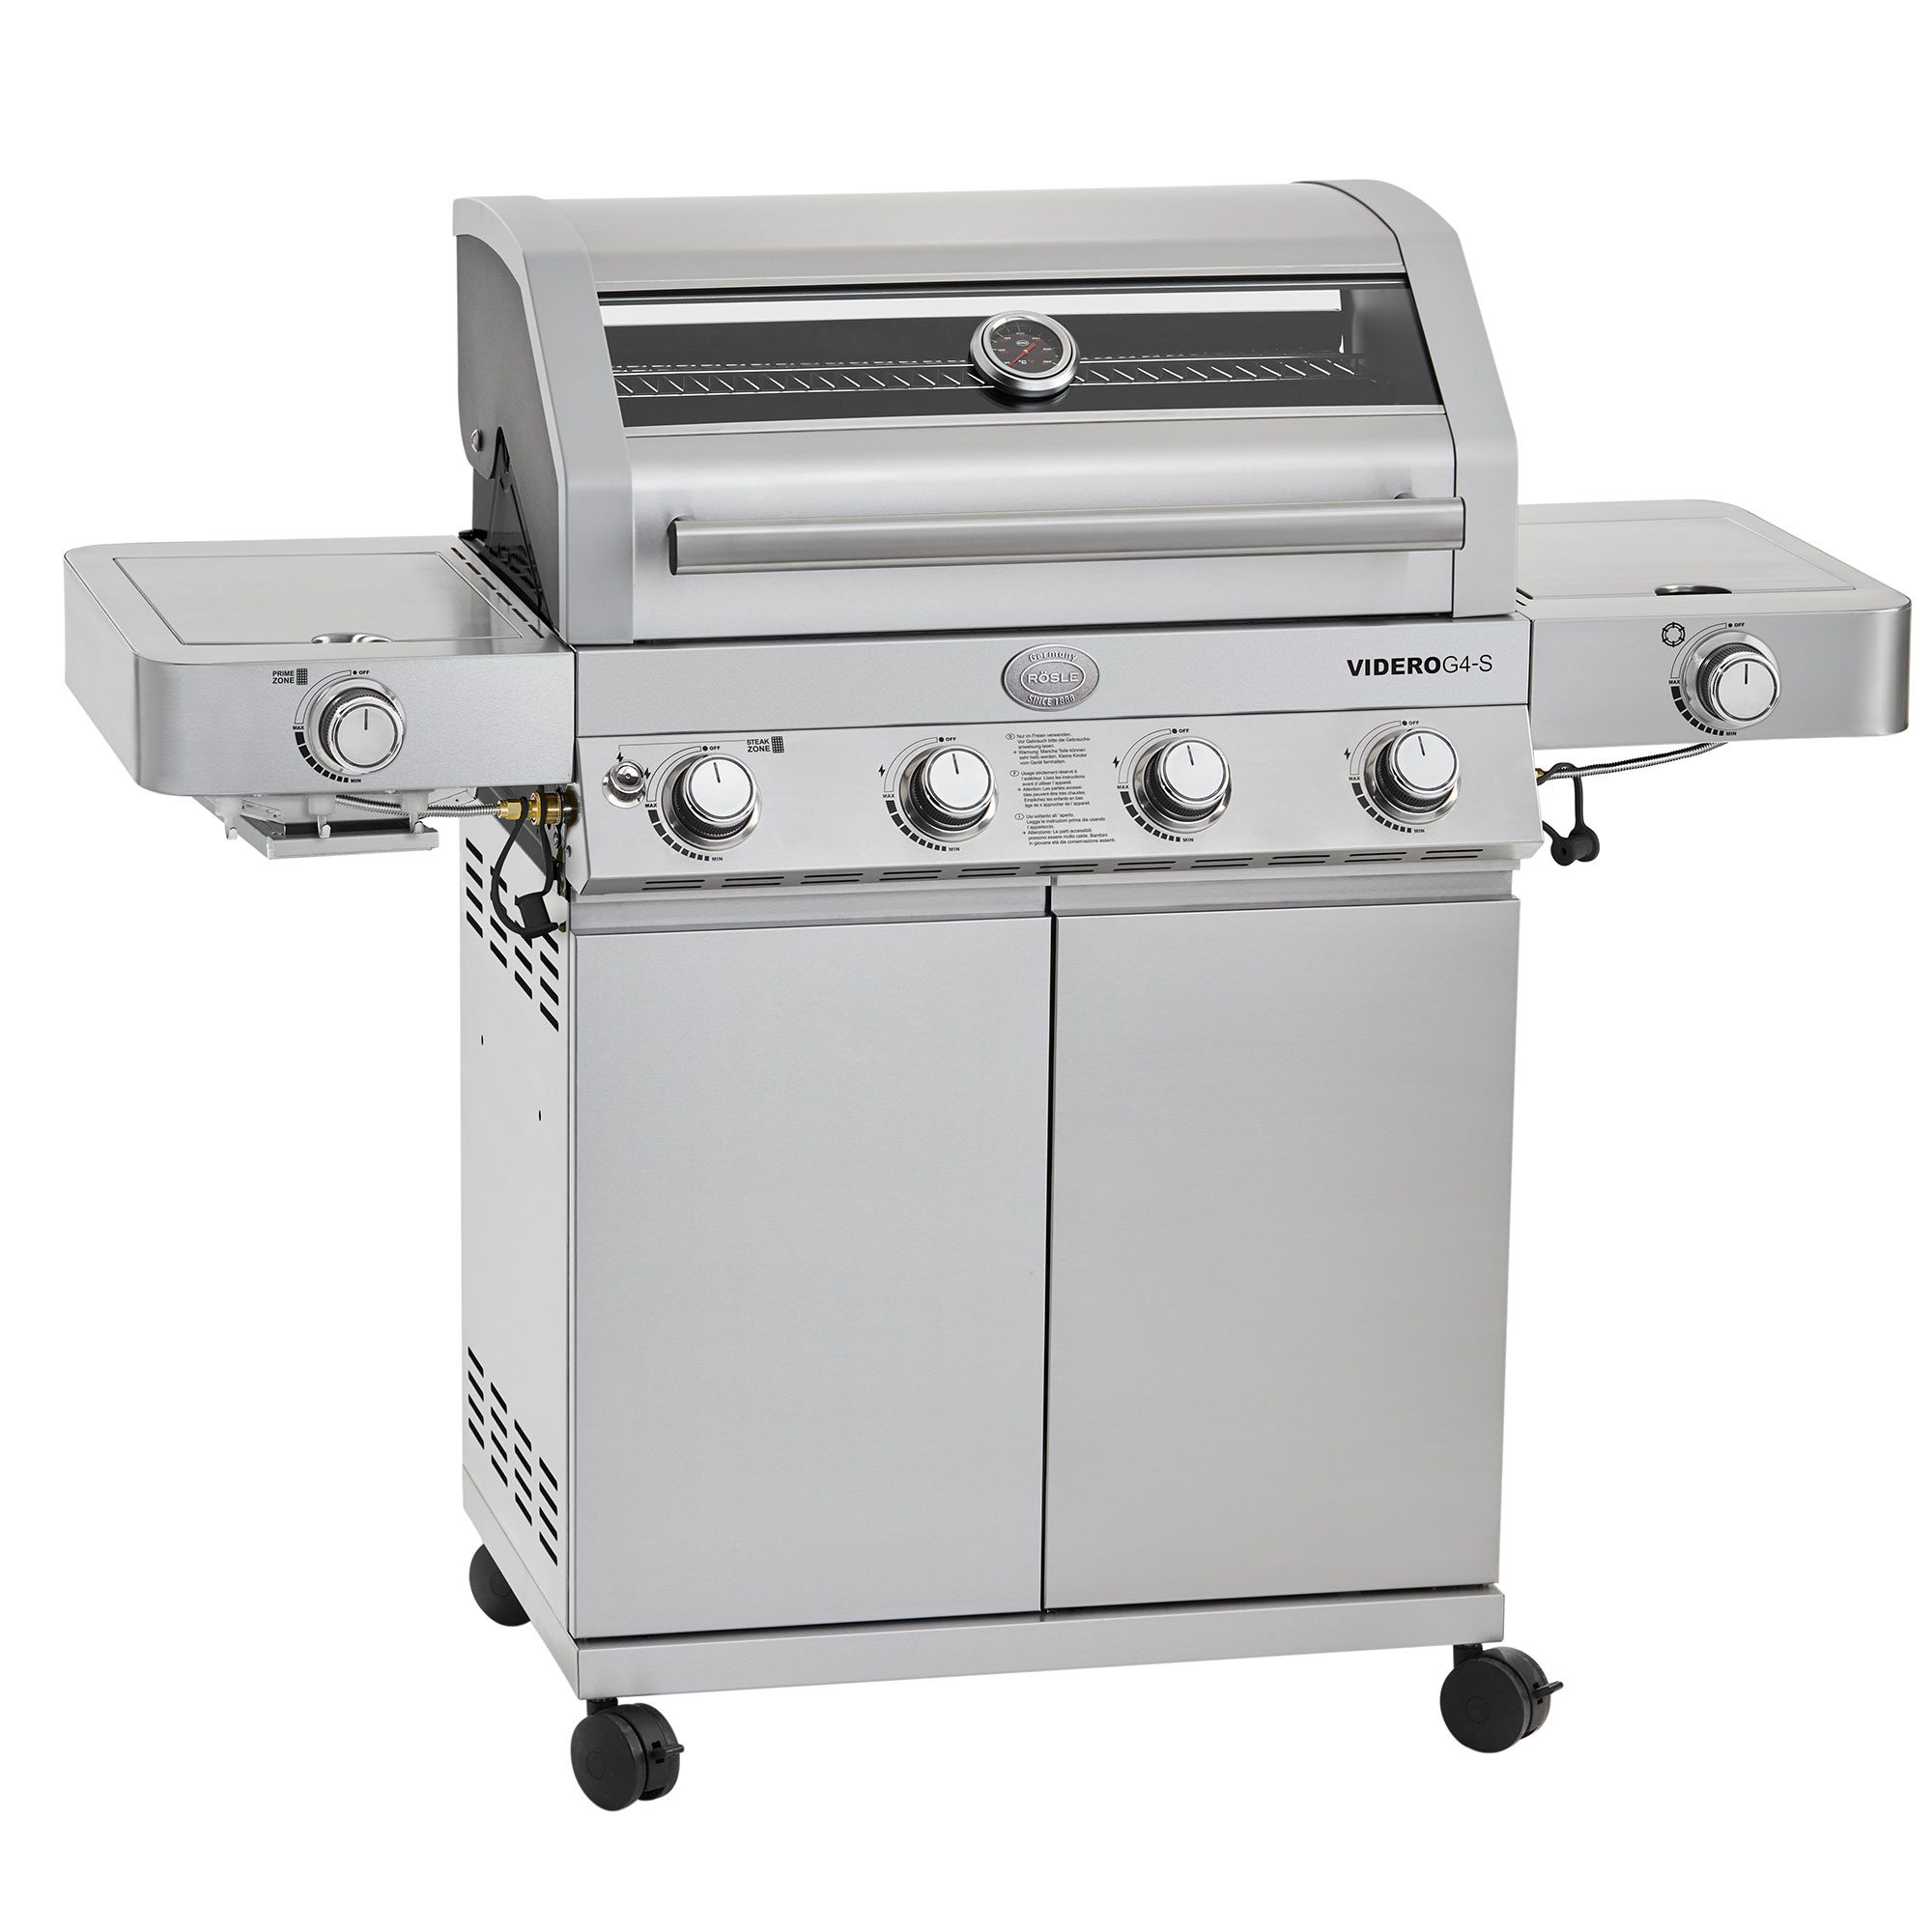 Gas grill BBQ-Station VIDERO G4-S Vario+ Stainless steel 50 mbar, Exclusive at Grillfürst